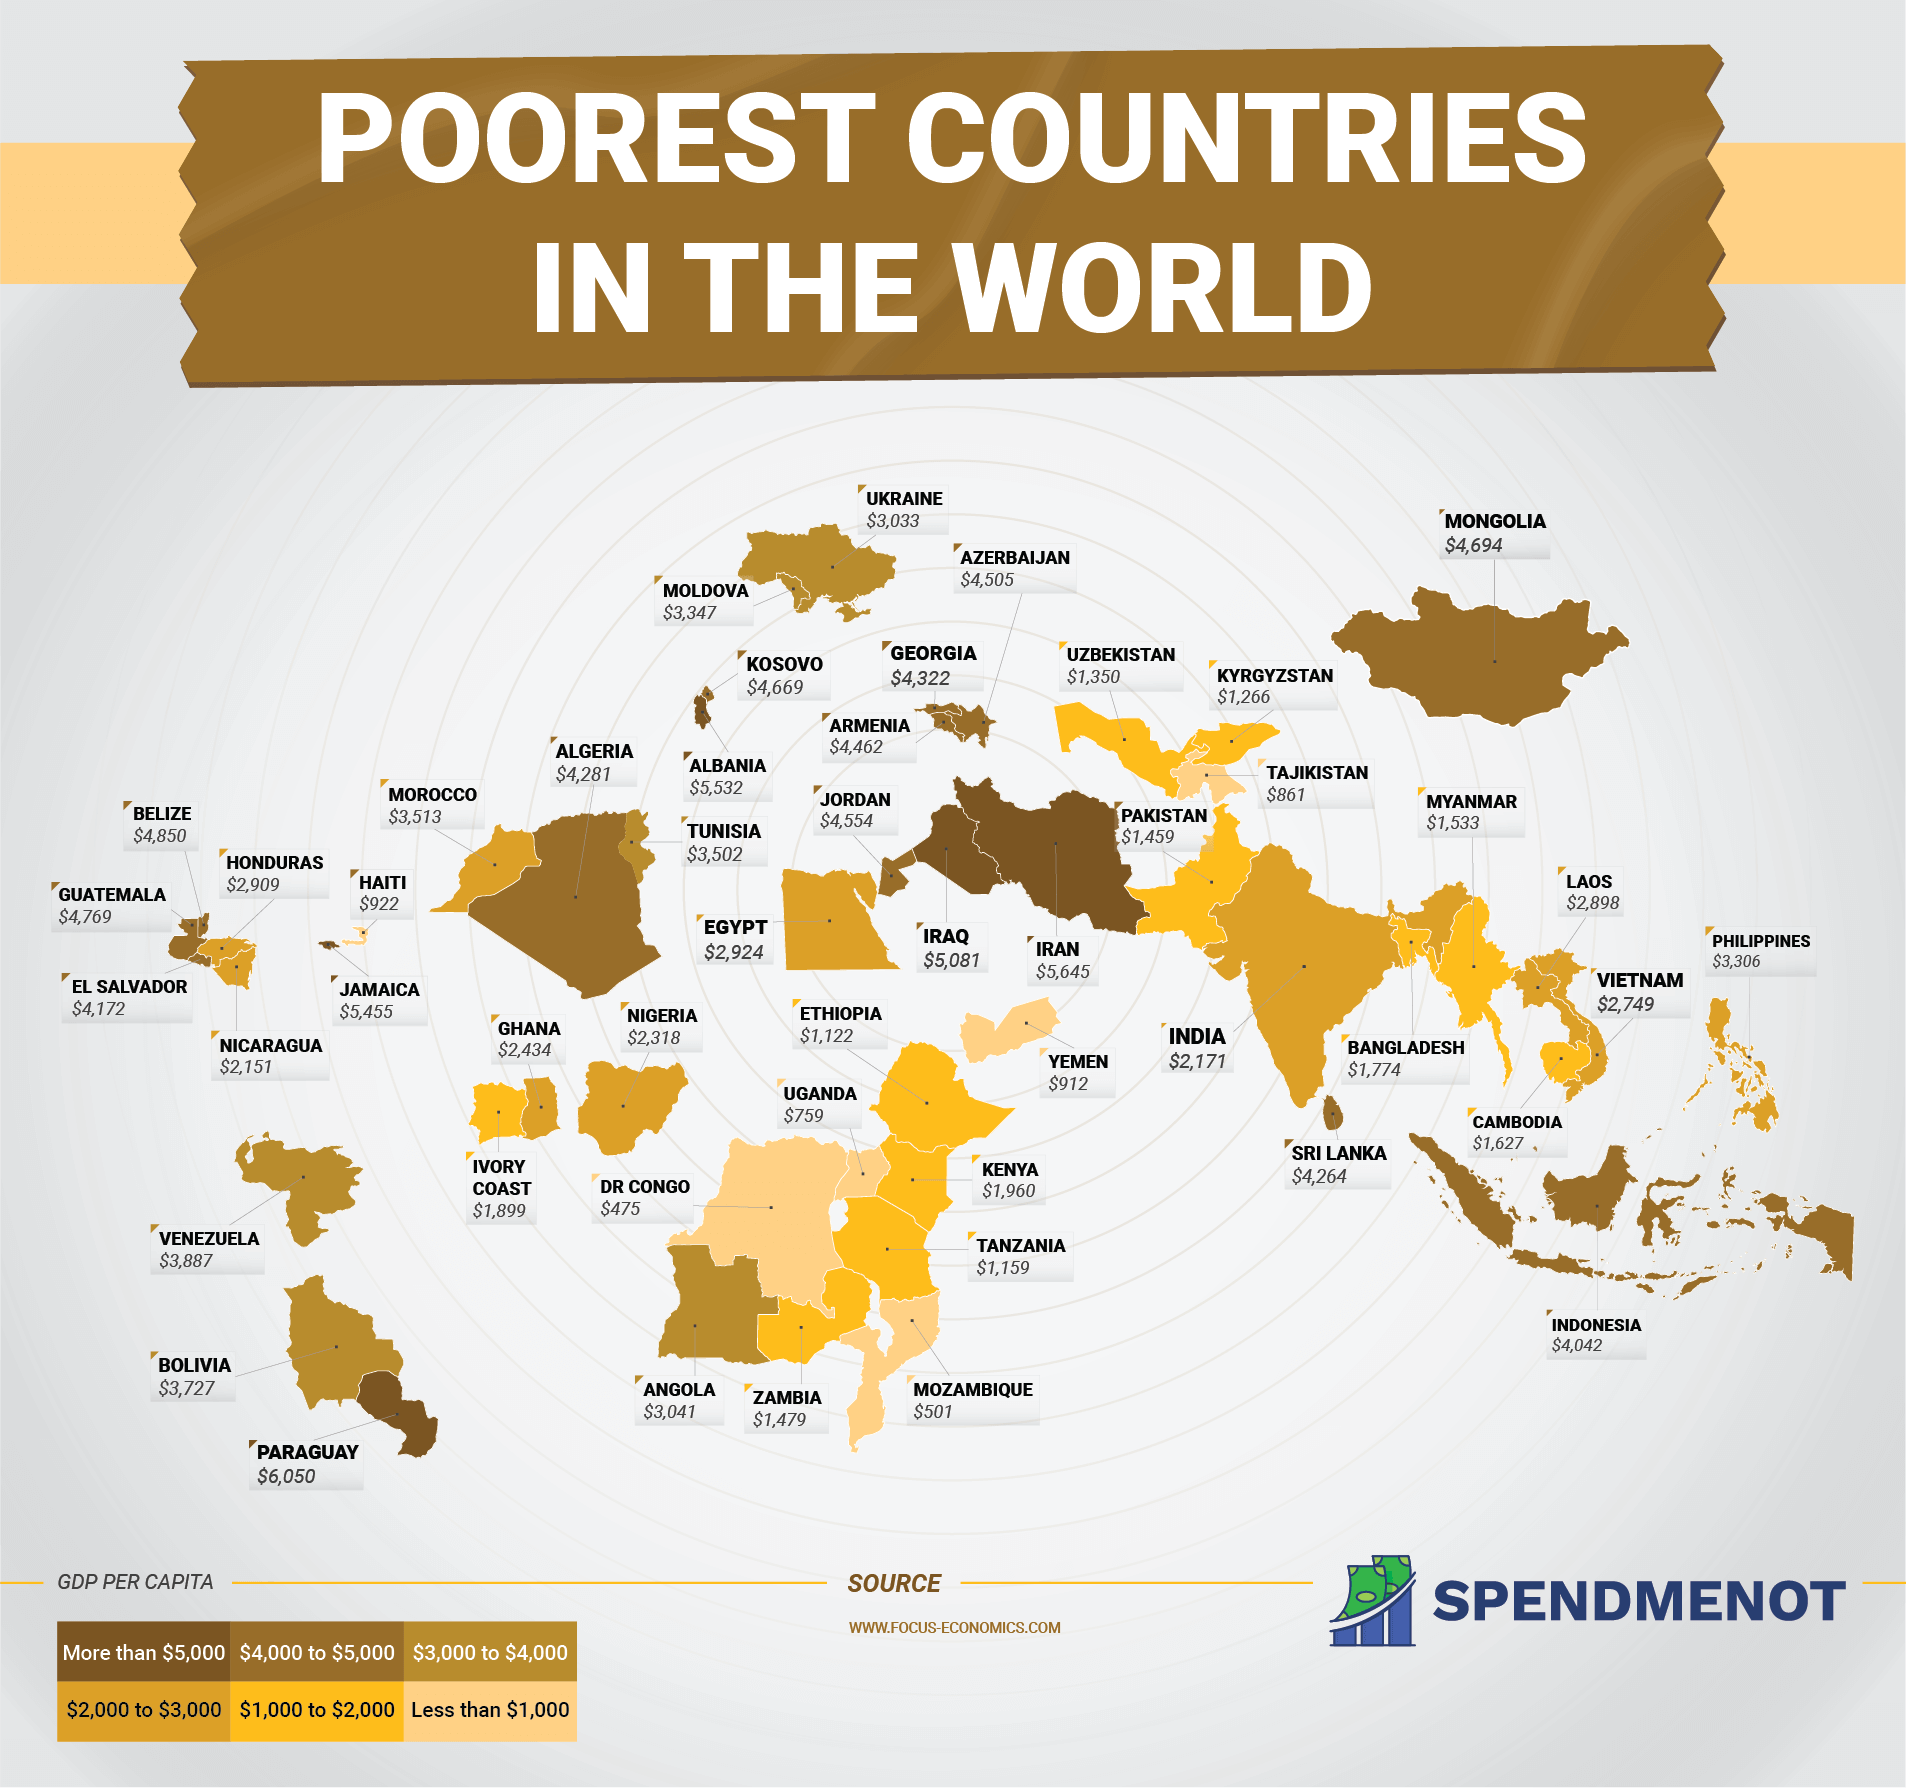 Poorest Countries in the World - A Map